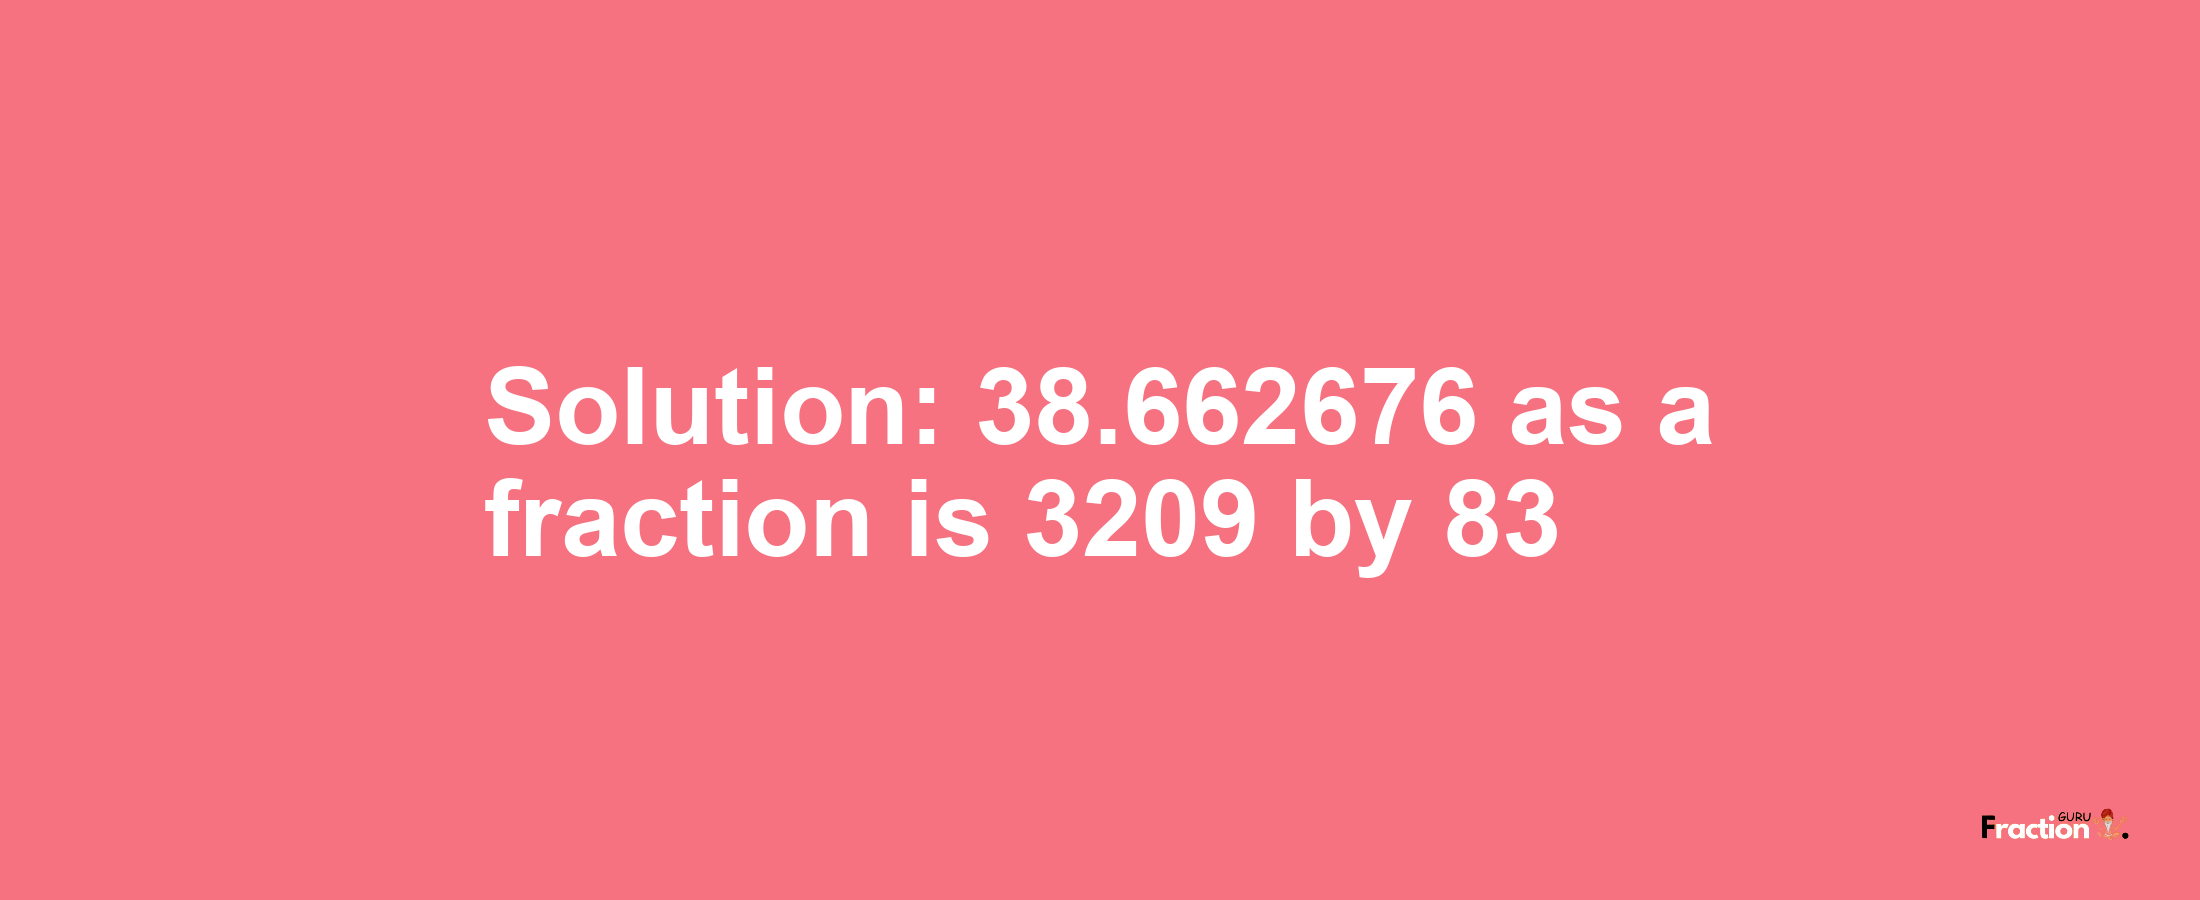 Solution:38.662676 as a fraction is 3209/83